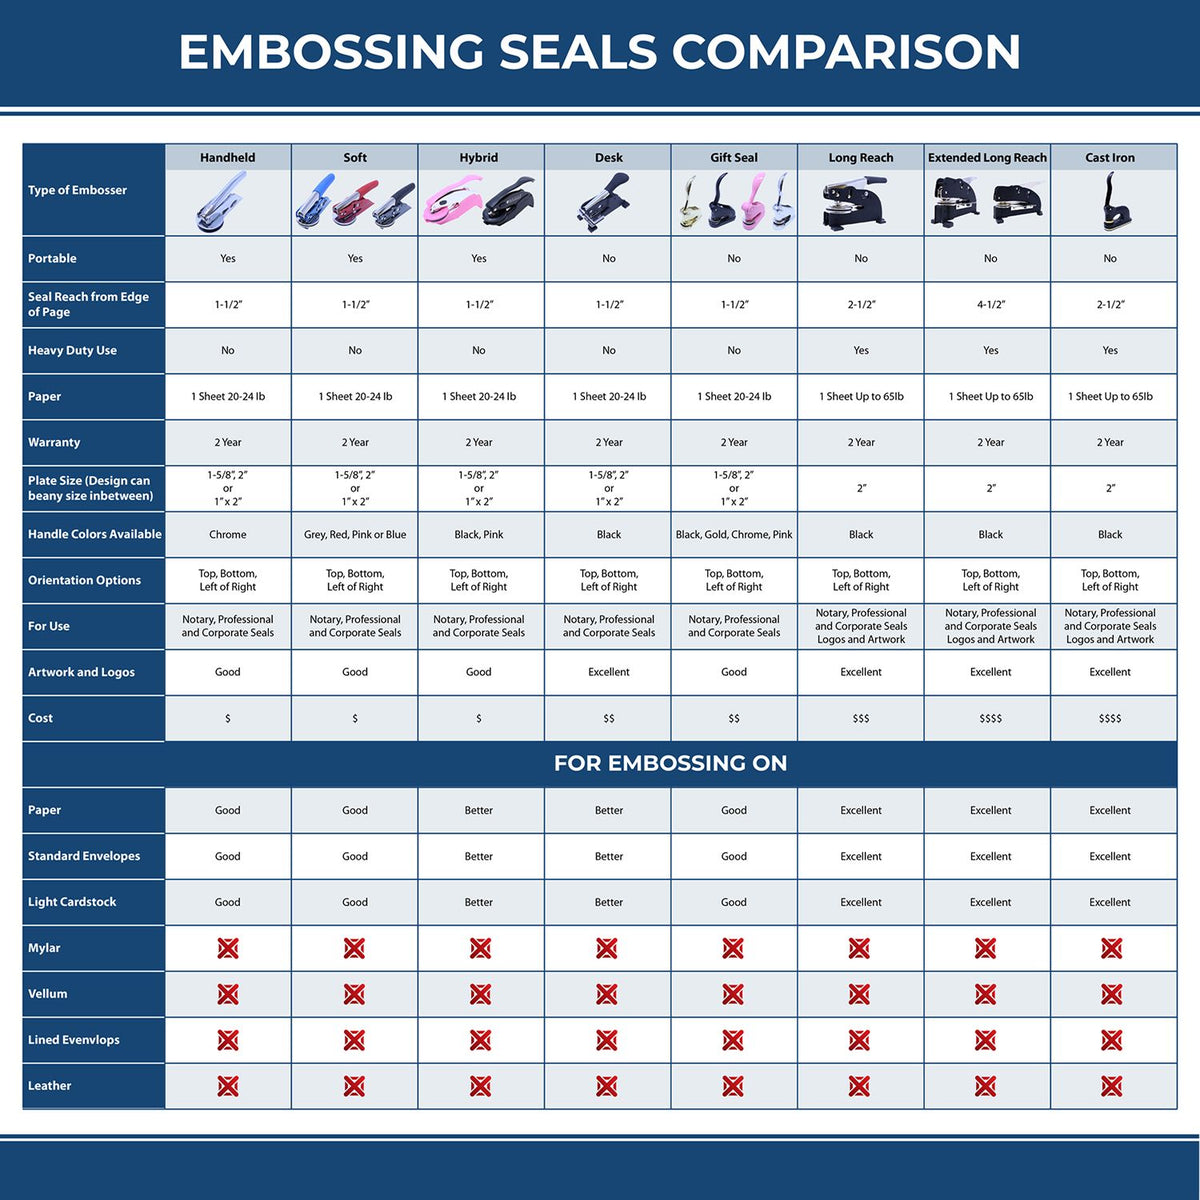 A comparison chart for the different types of mount models available for the Handheld Illinois Architect Seal Embosser.